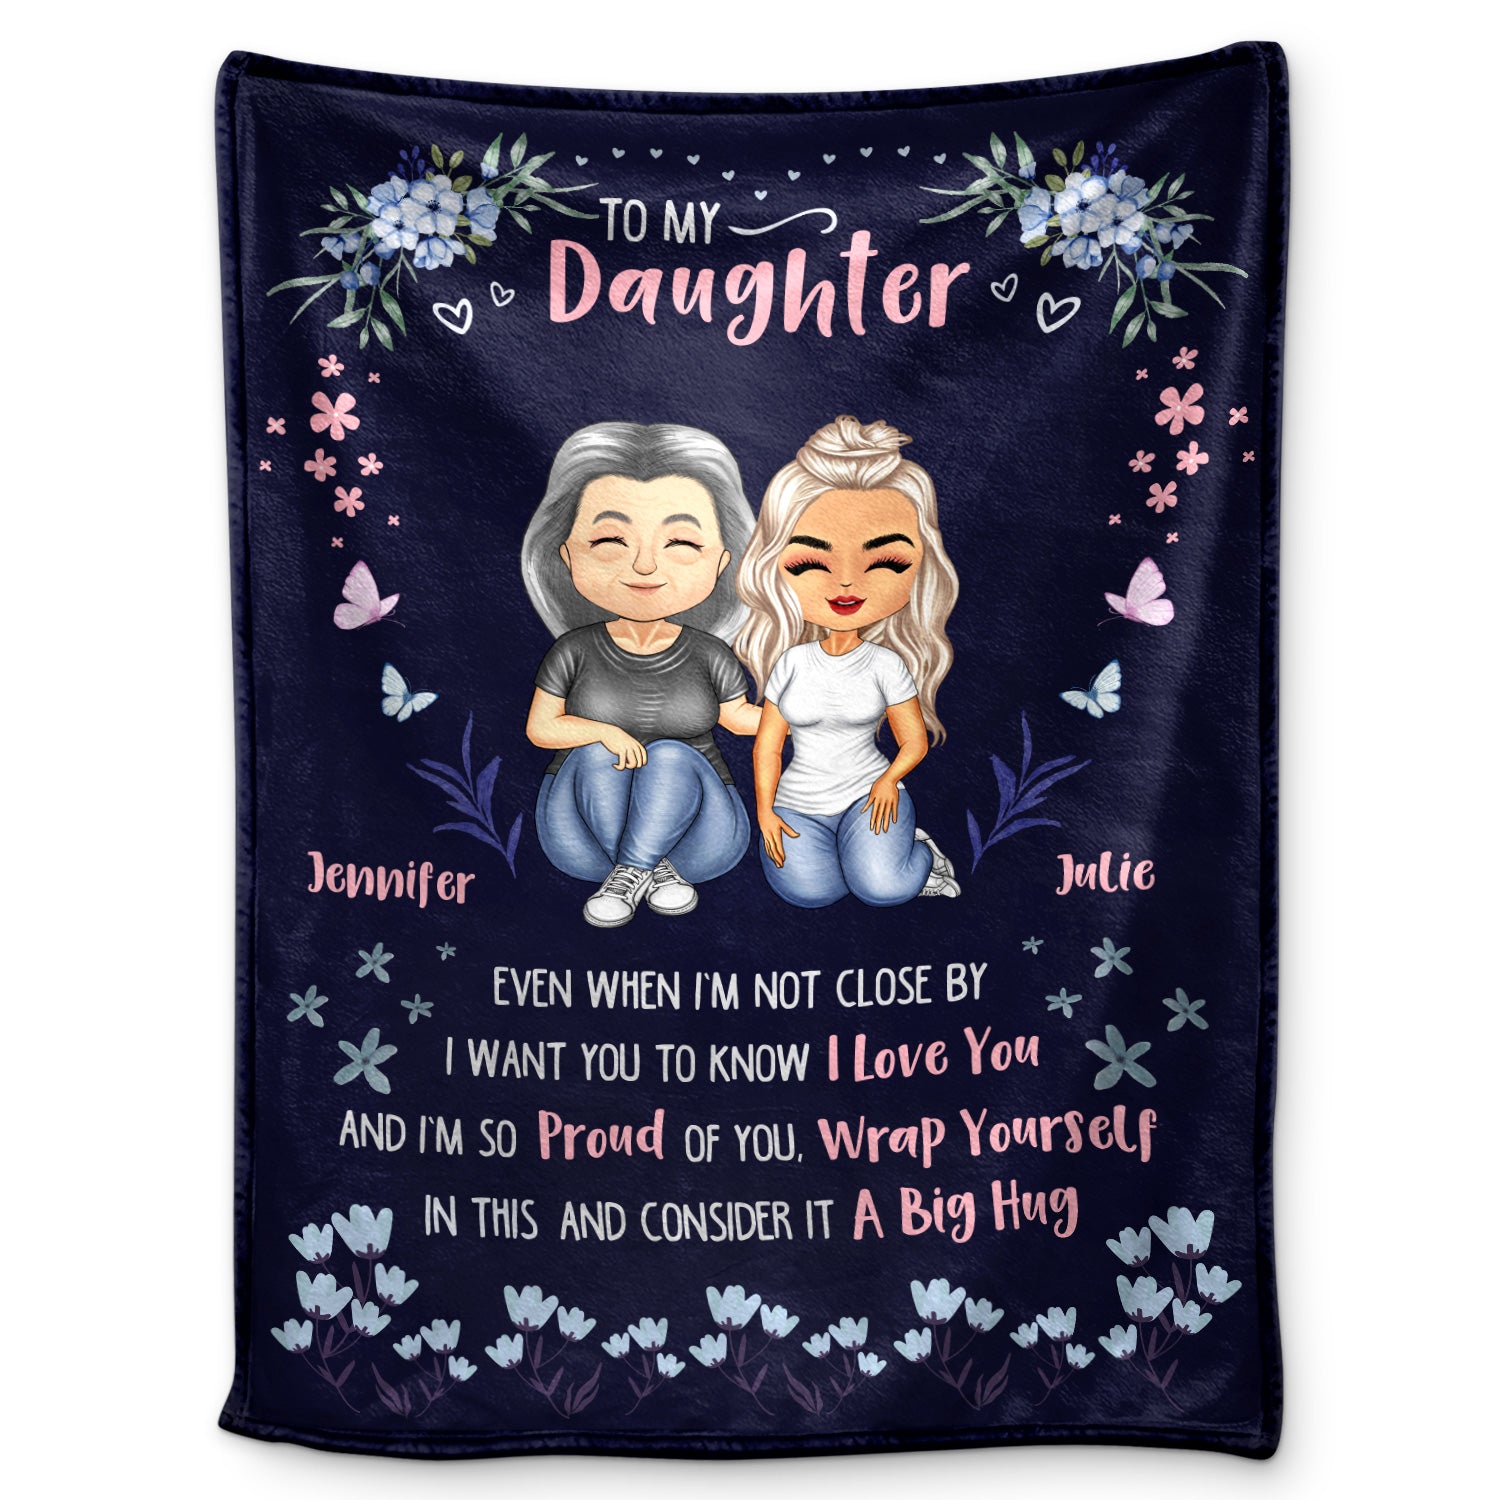 I Want You To Know I Love You - Gift For Daughter, Granddaughter - Personalized Fleece Blanket